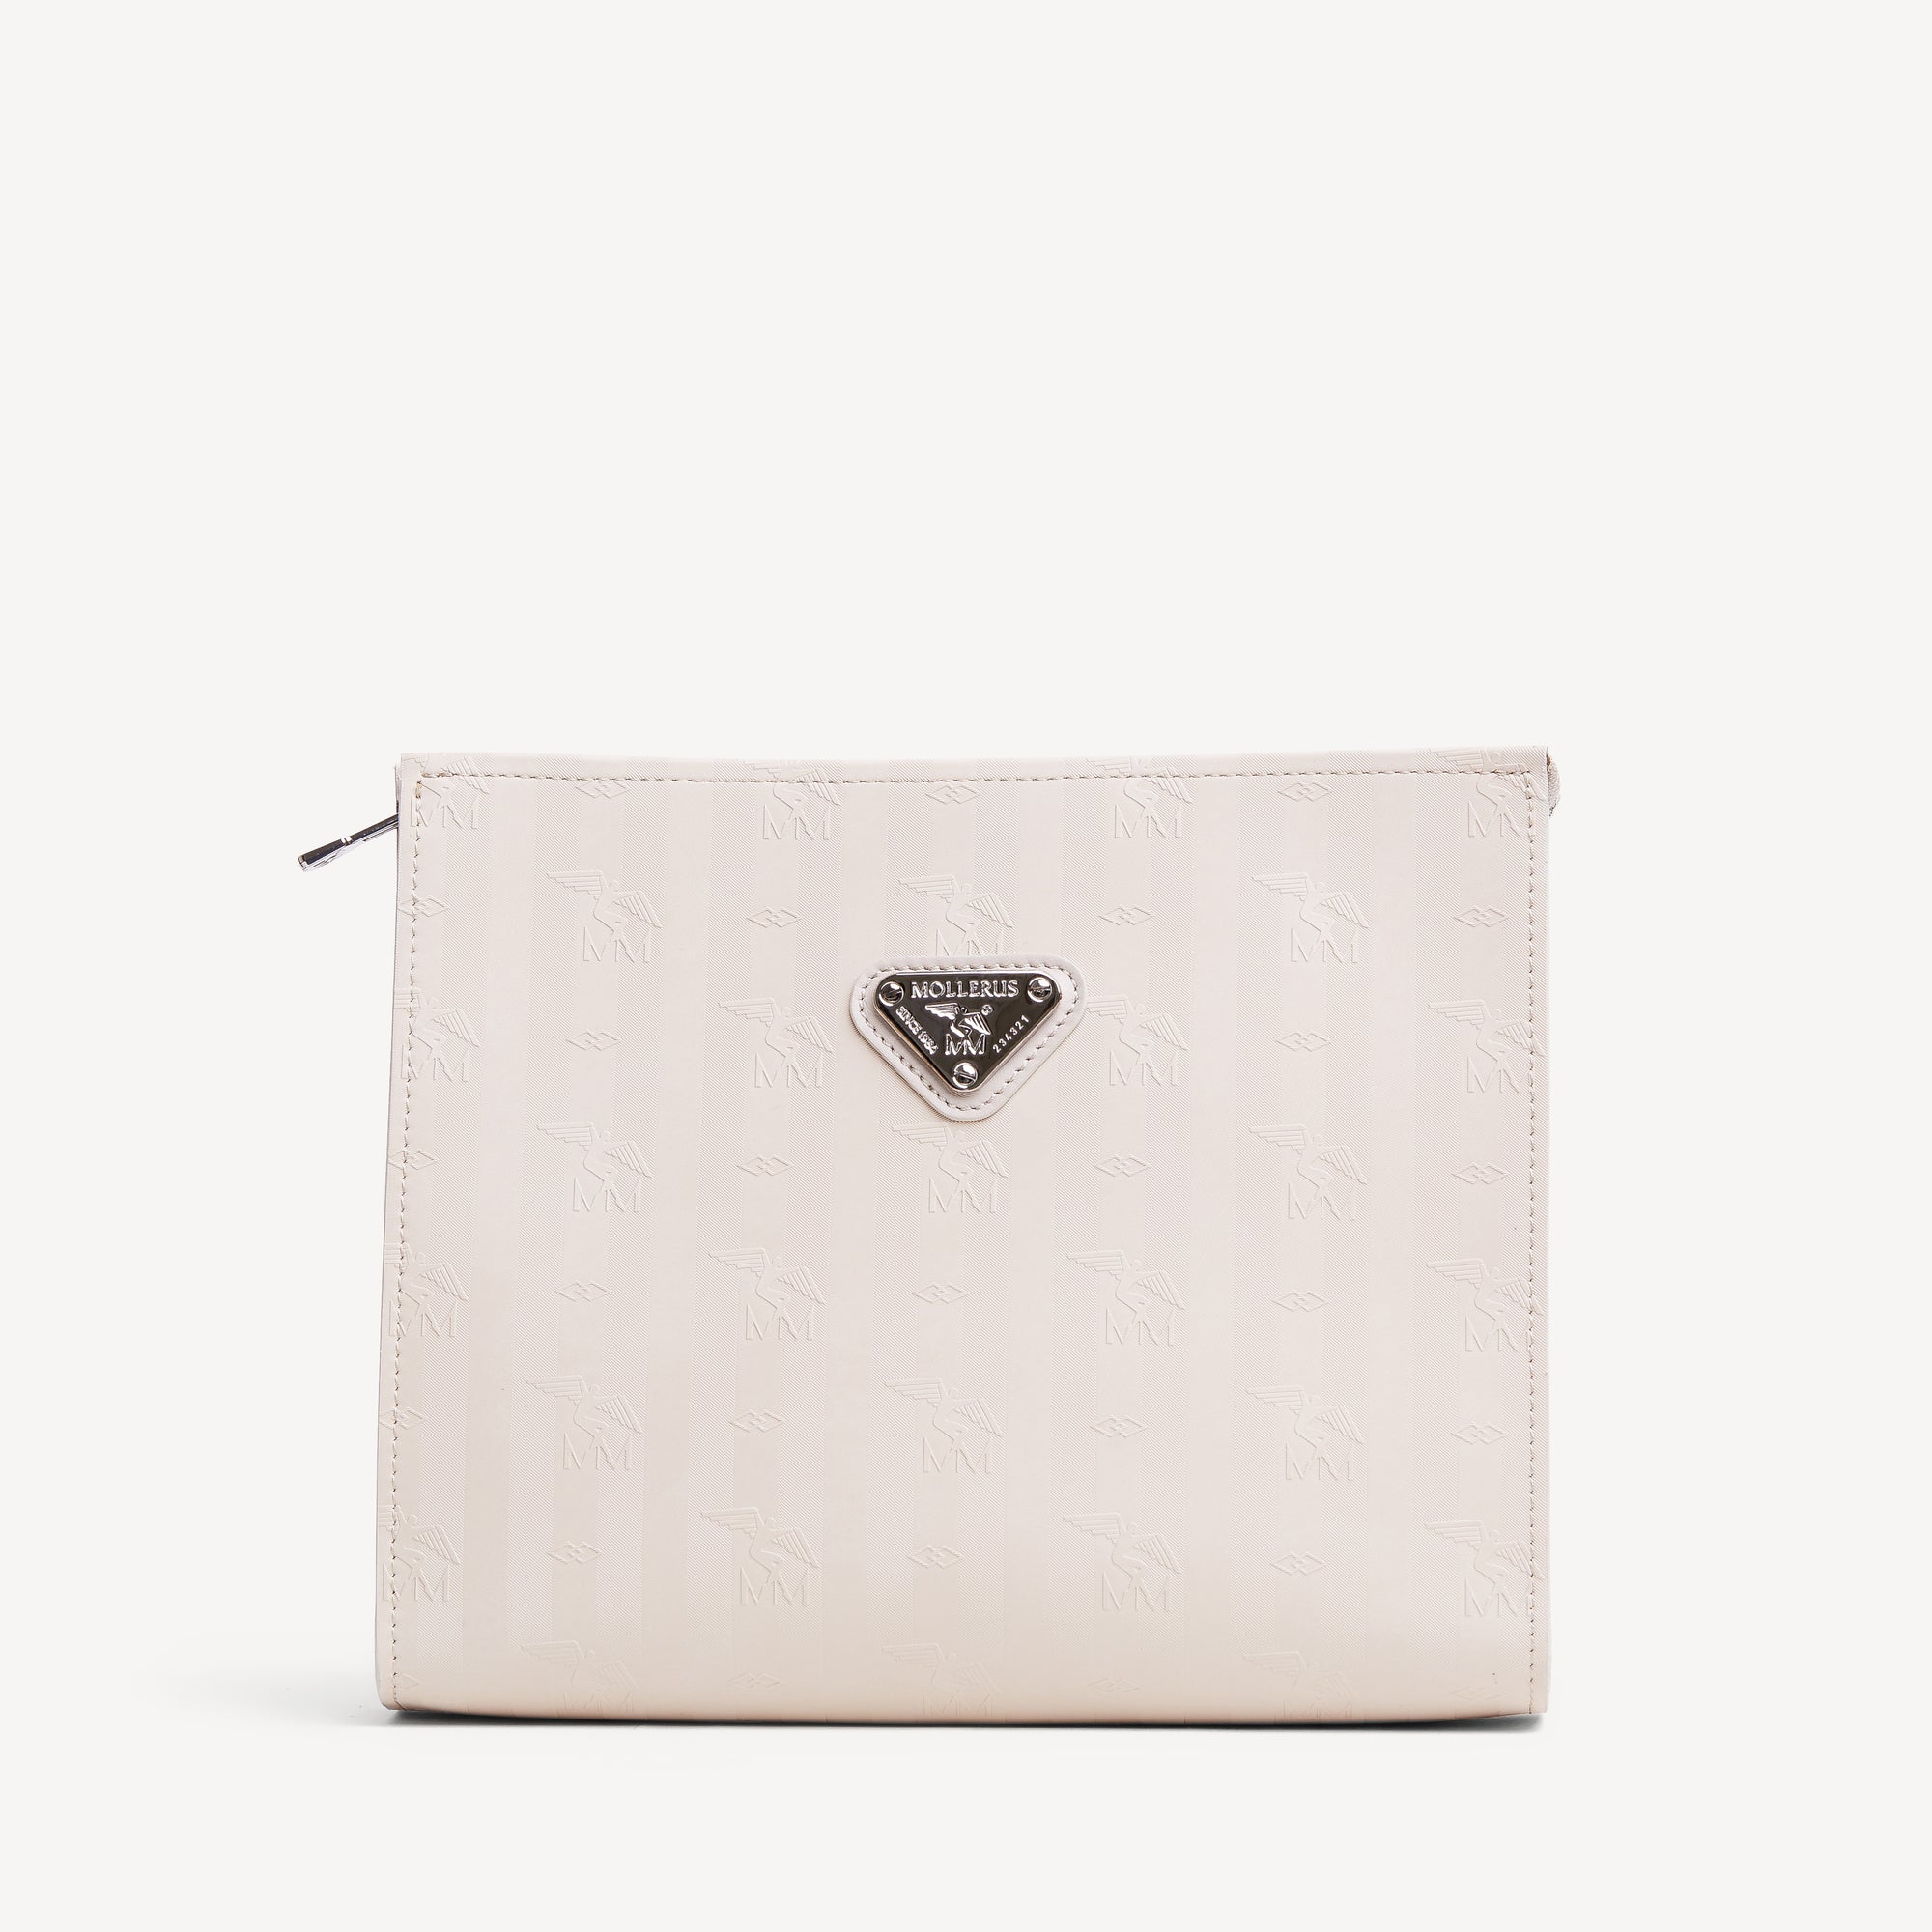 REUTE | Necessaire pearl weiss/silber- frontal